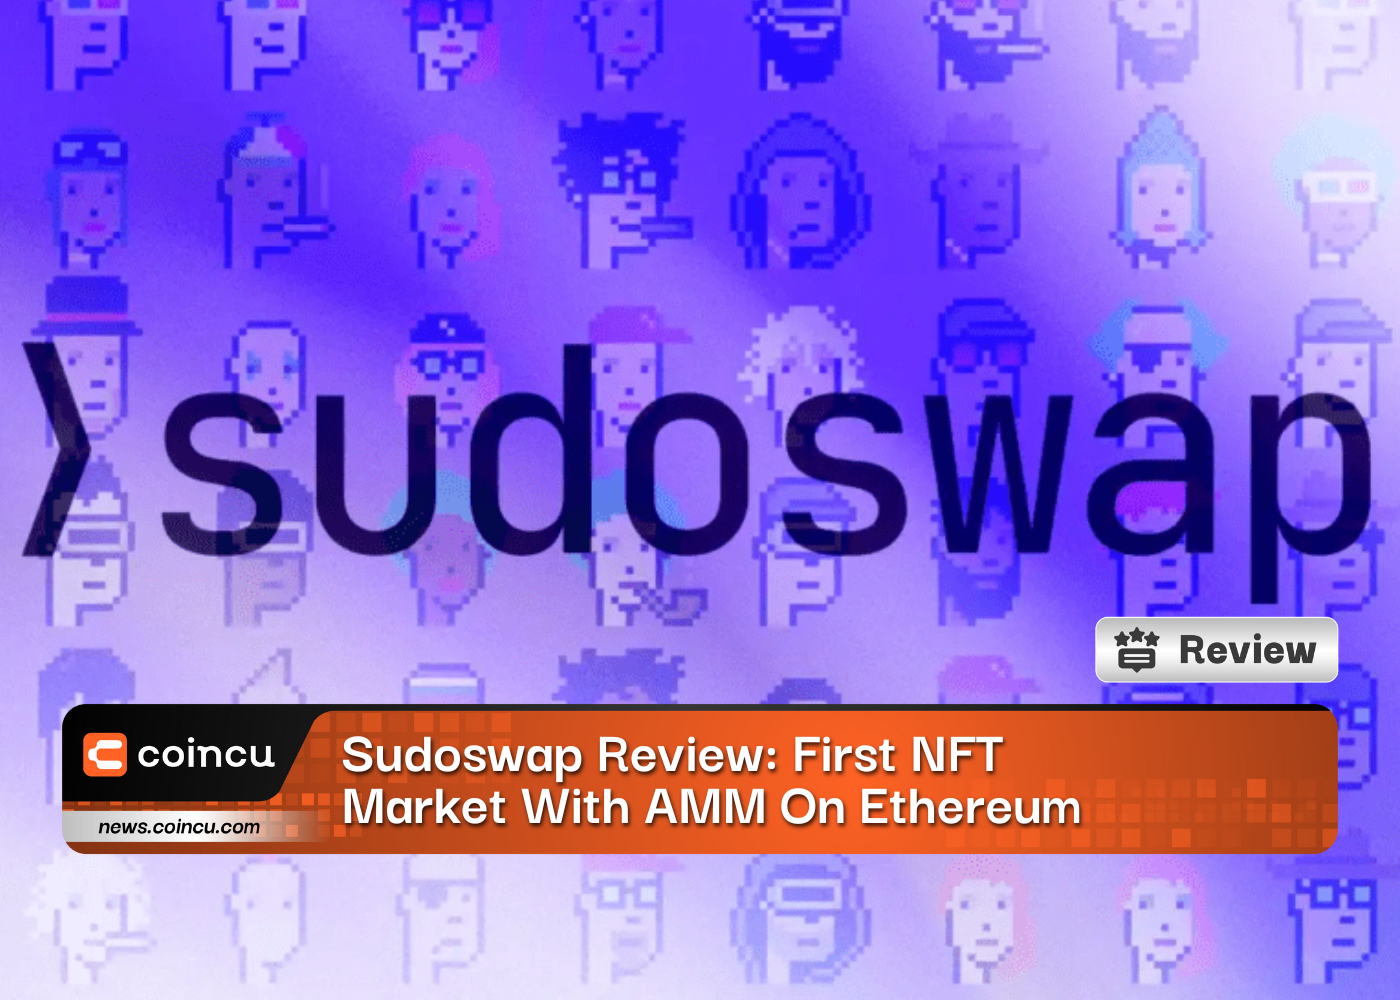 Sudoswap Review: First NFT Market With AMM On Ethereum